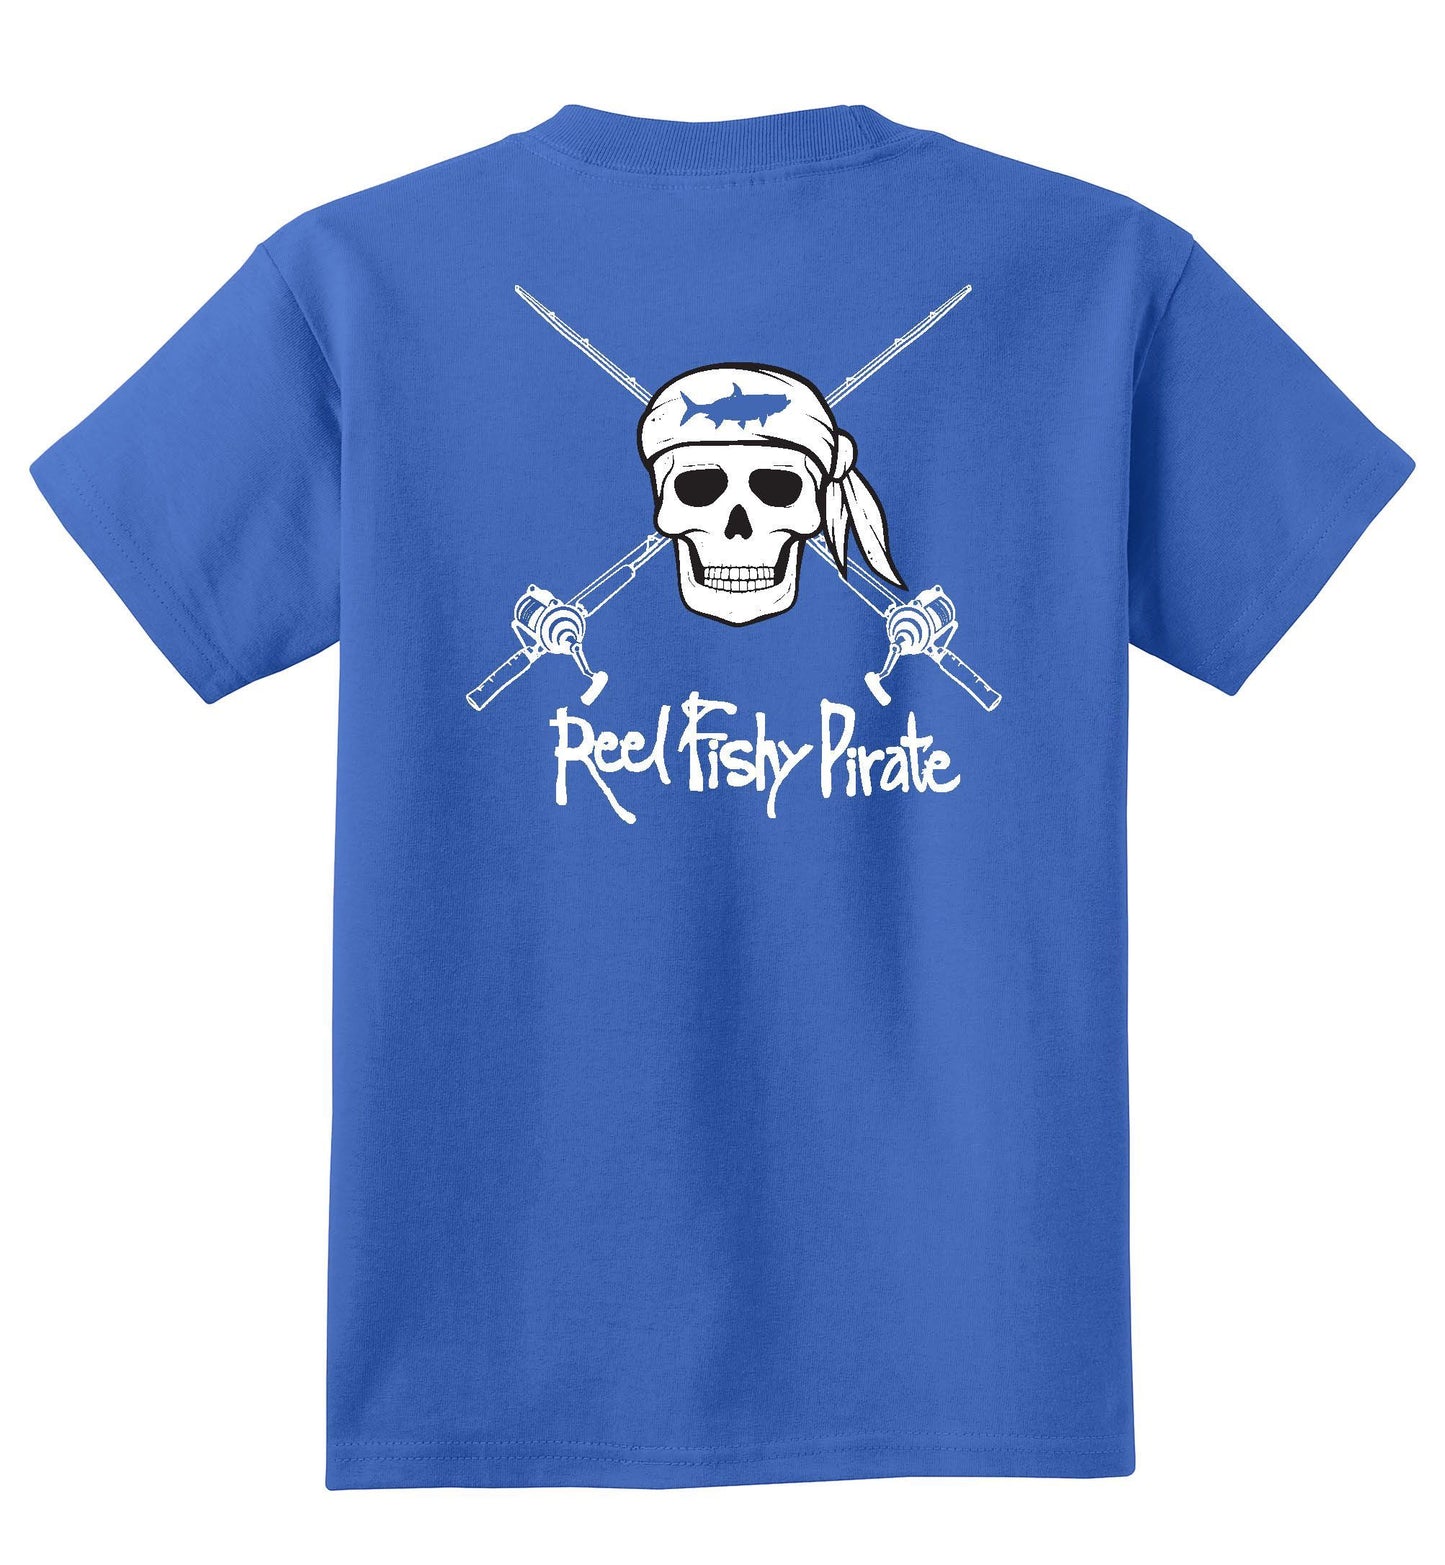 Youth Fishing Cotton T-shirts with Reel Fishy Pirate Skull & Salt Fishing Rods Logo 18M / Candy Pink